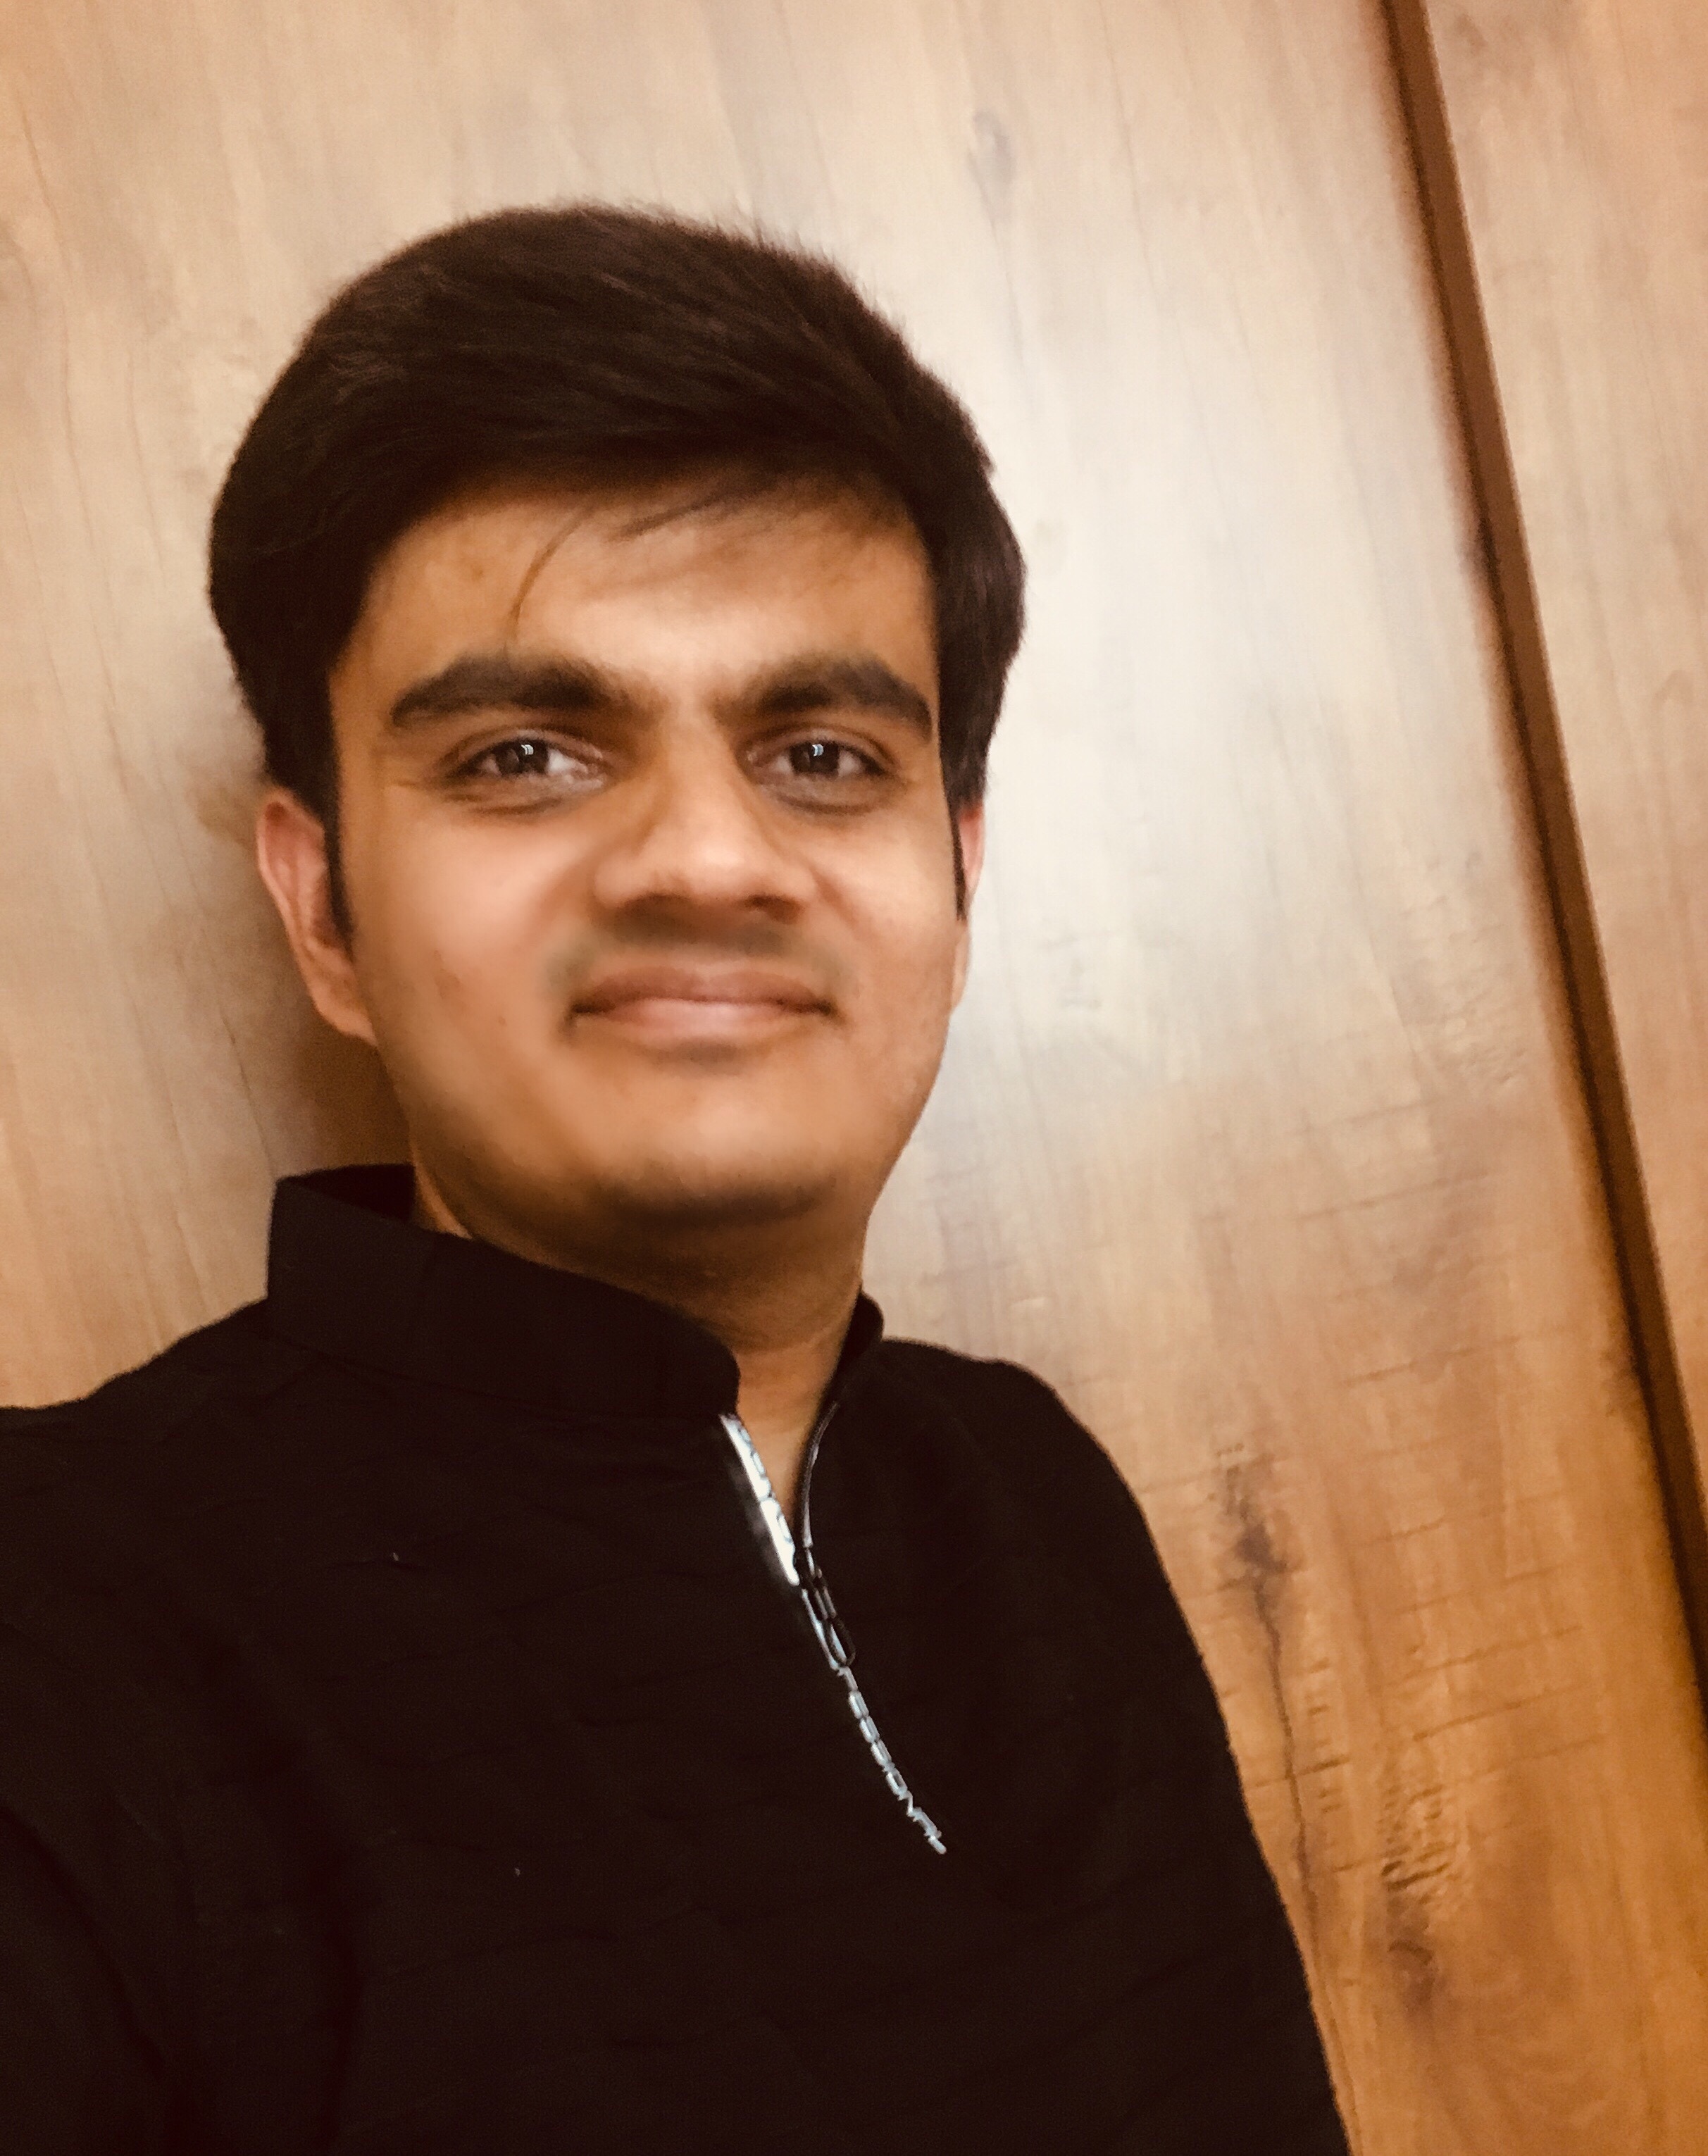 CHARUSAT student get selected for Apple WWDC19 Scholarship @ USA